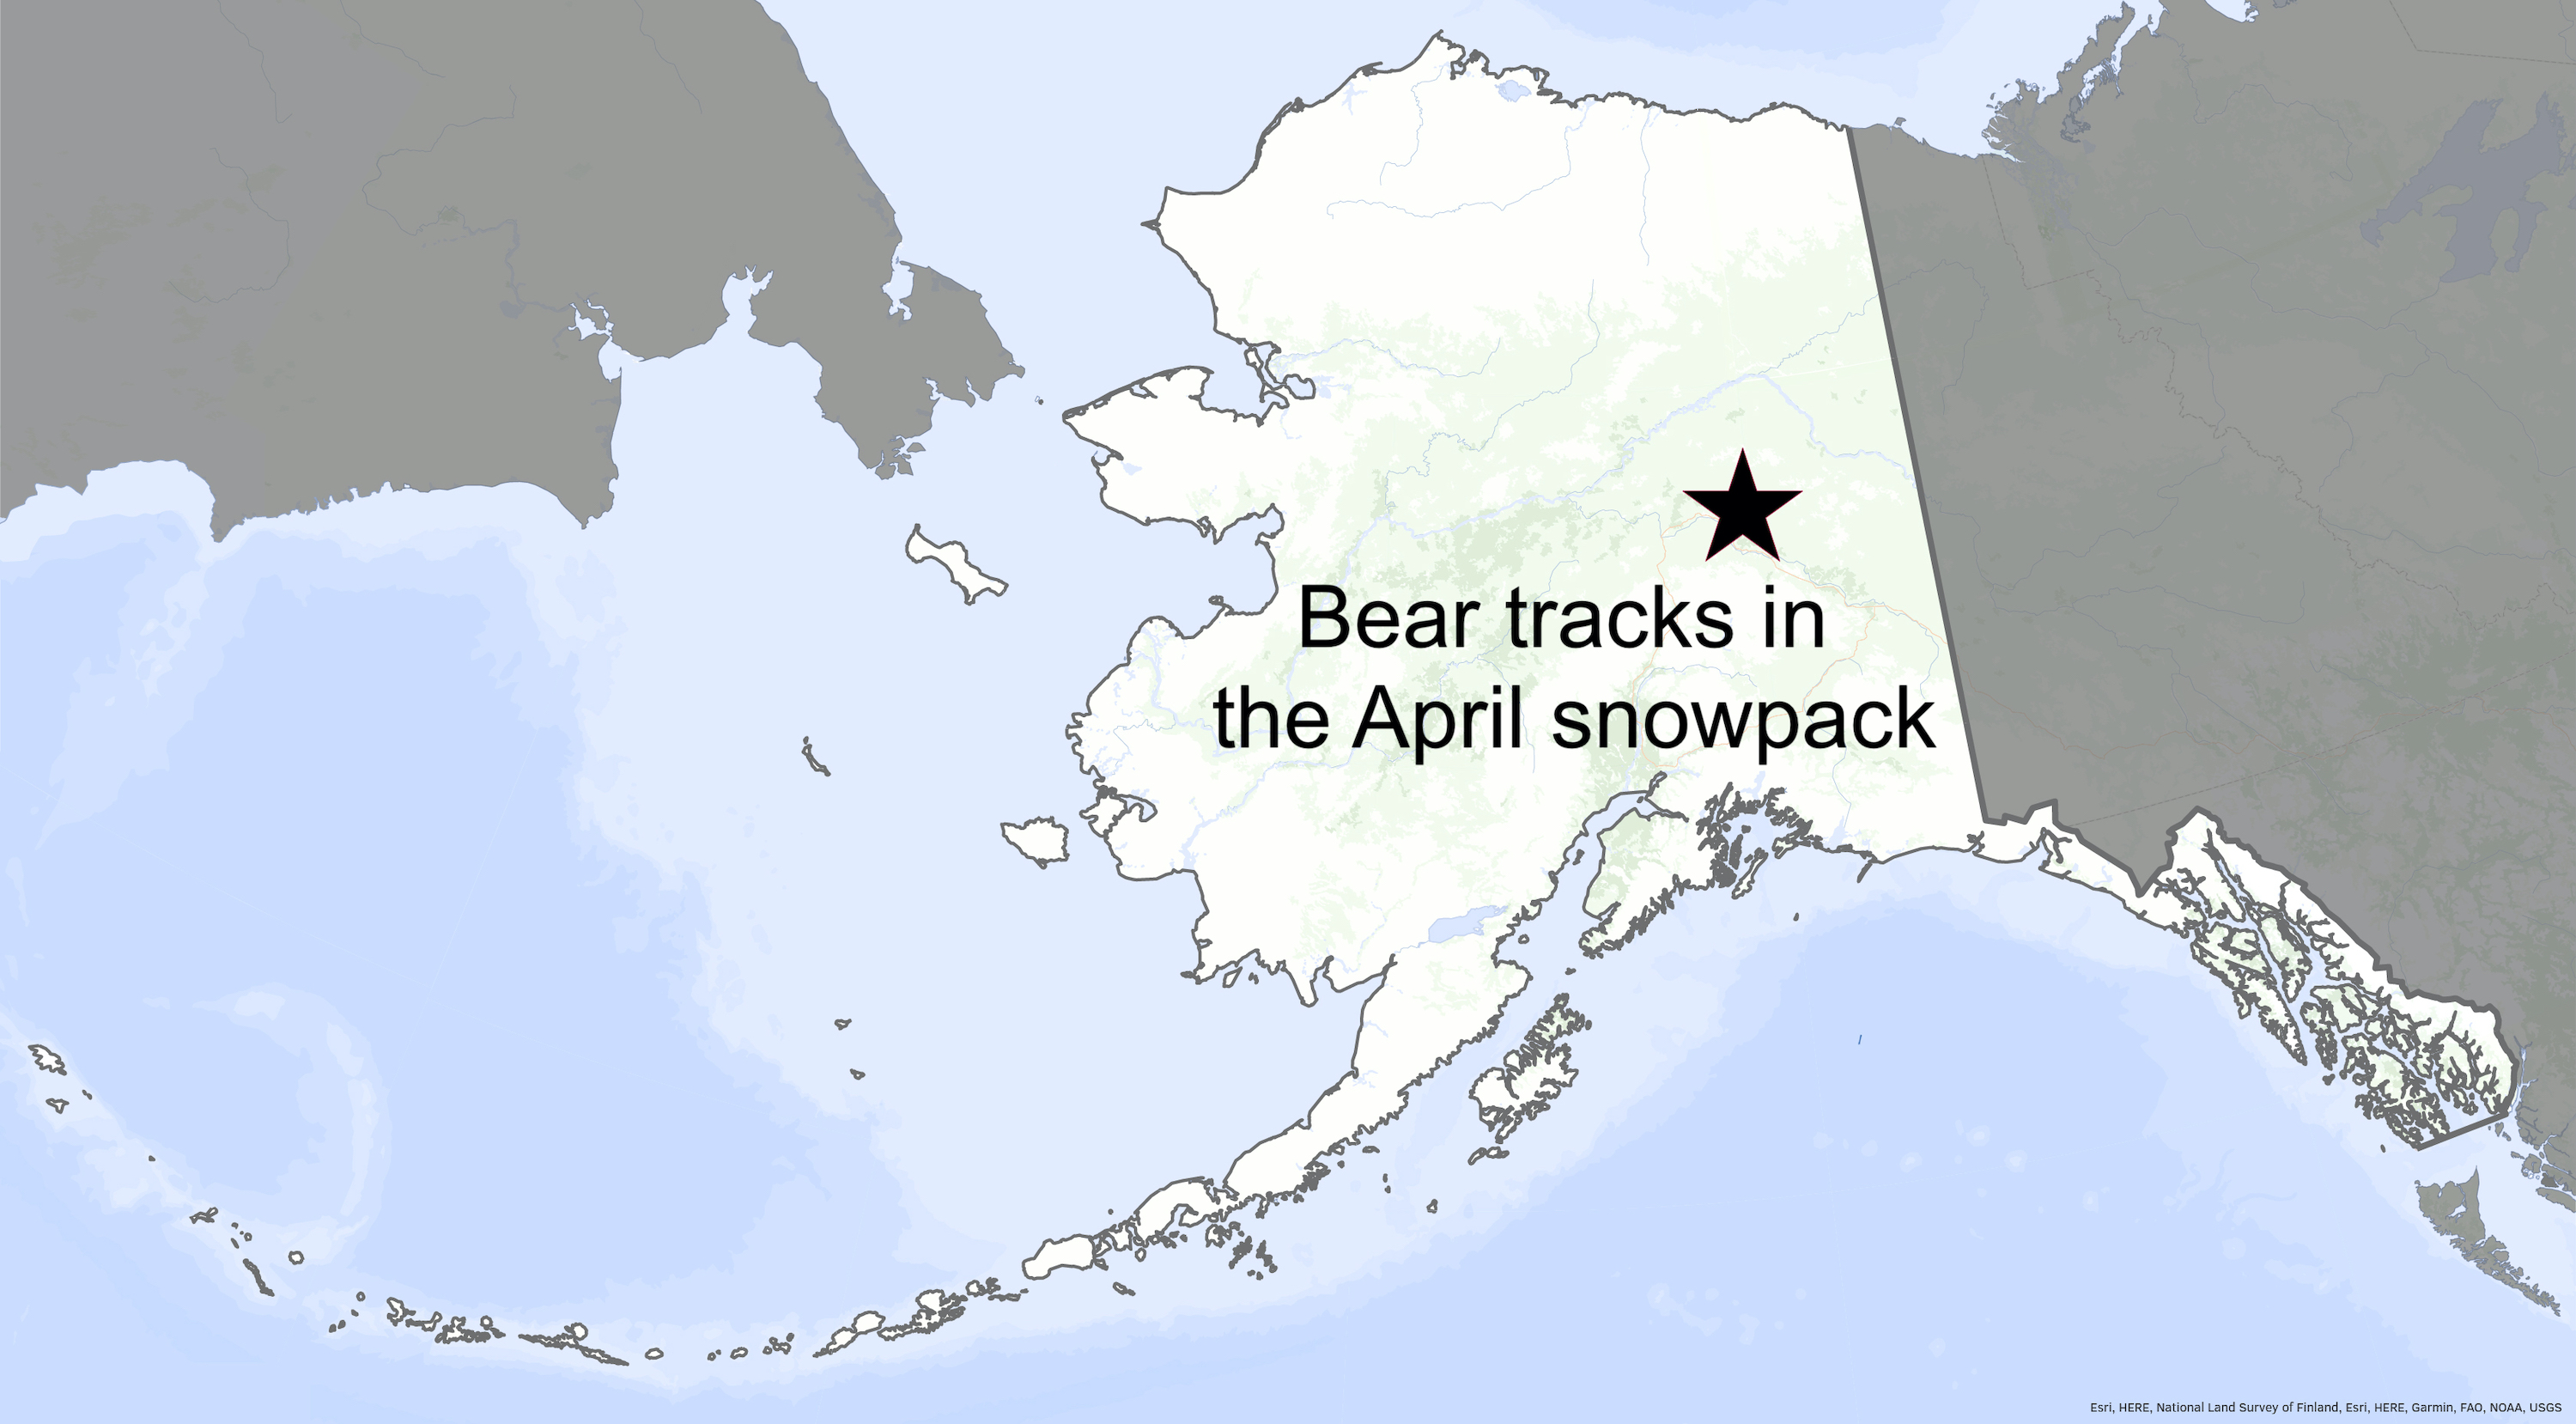  A star near the center of a map of Alaska indicates the location of recently spotted grizzly bear tracks.